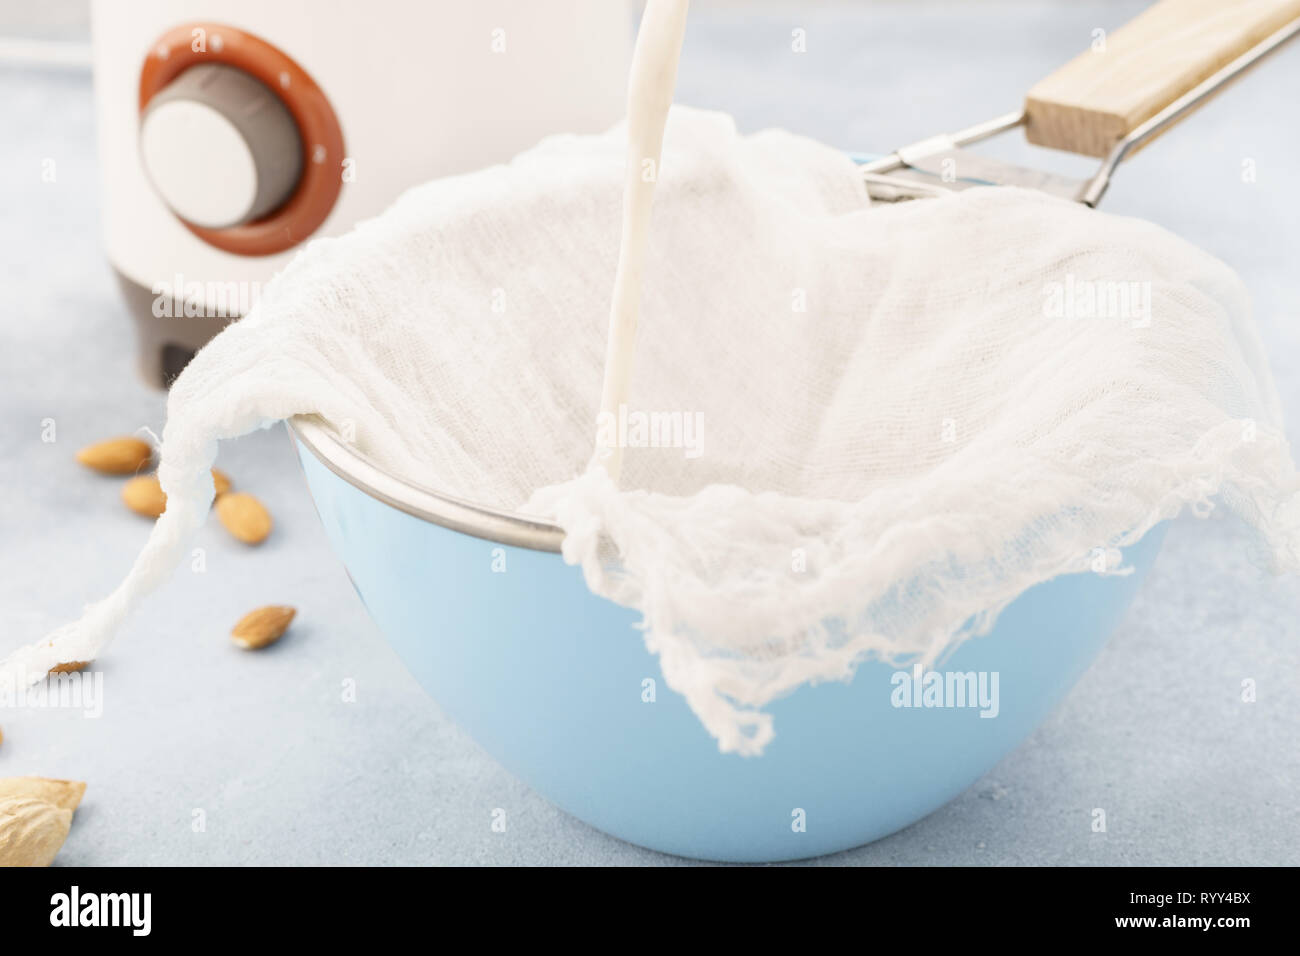 Homemade nut milk making process. Pouring milk into cloth. Step by step recipe. Stock Photo